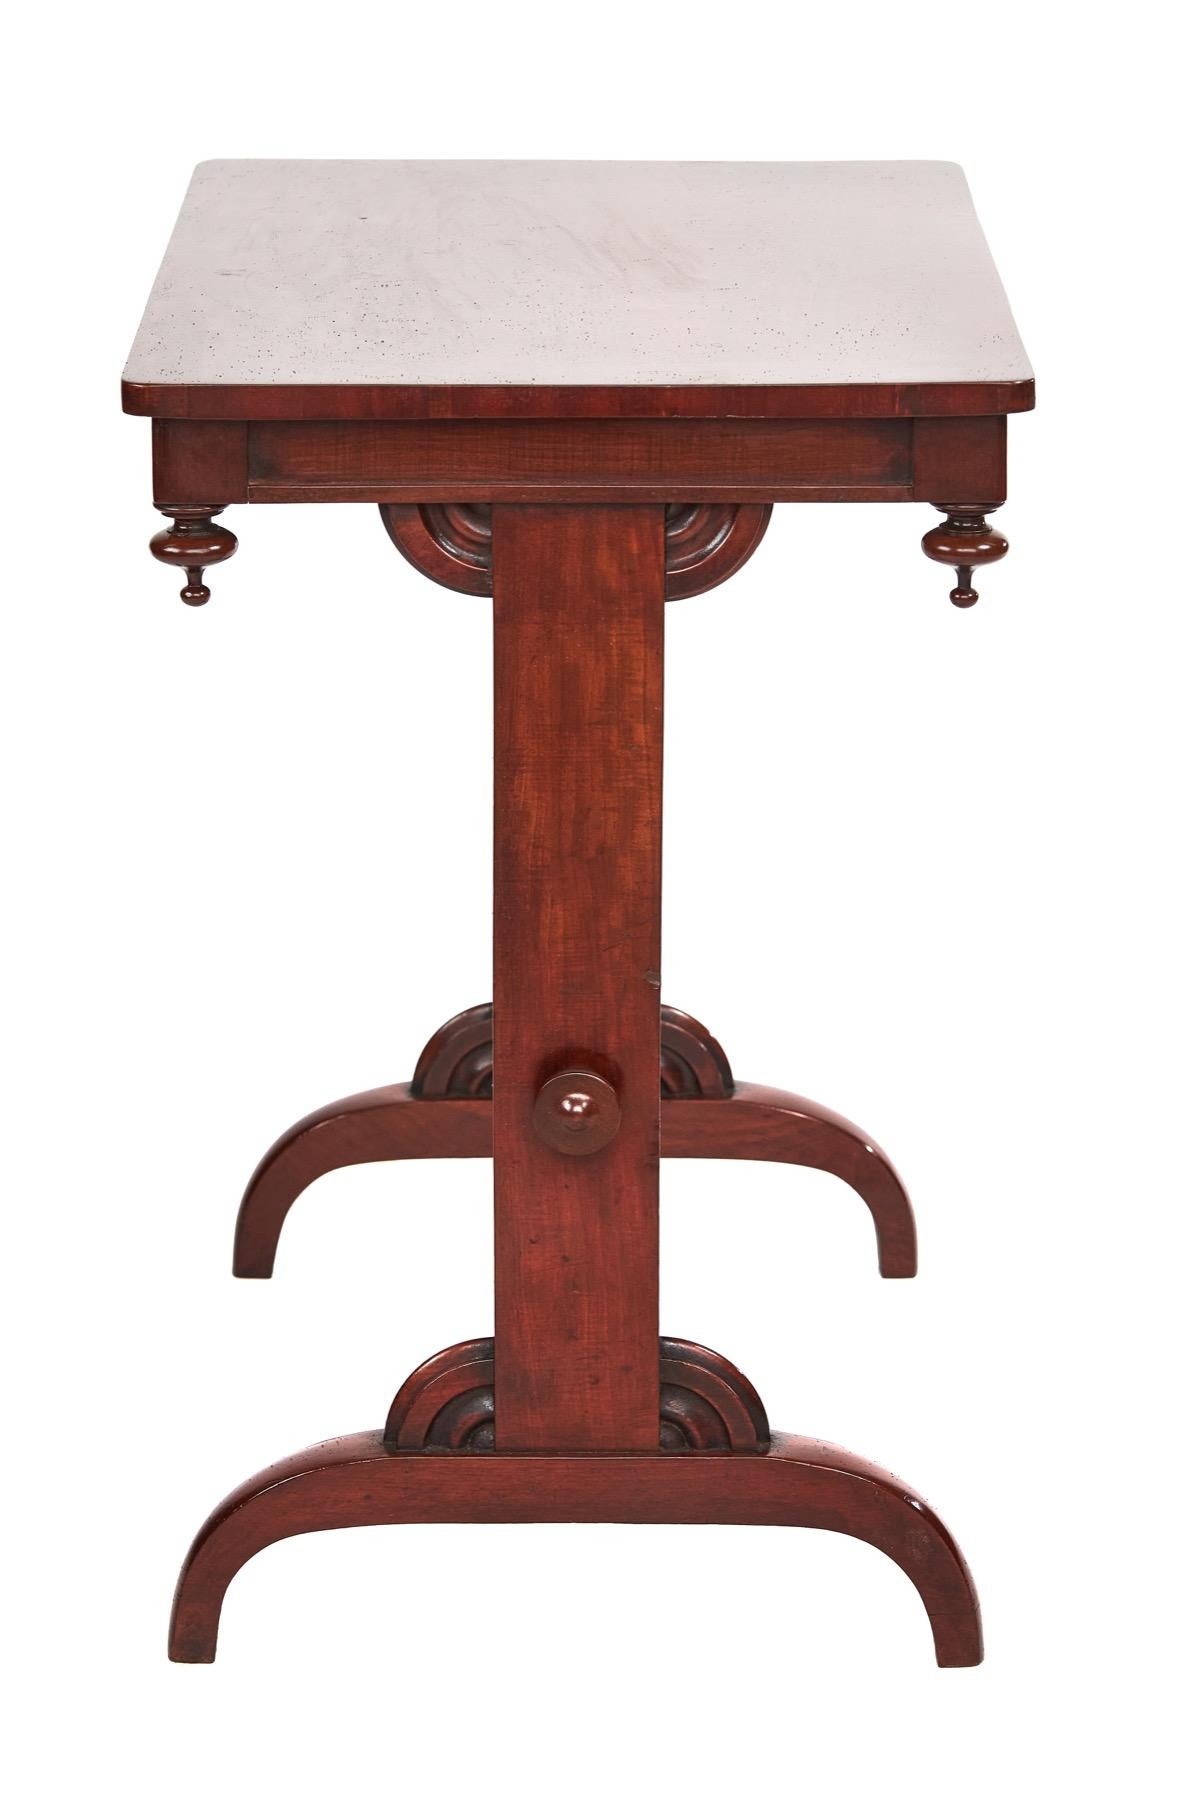 William IV W1V Period Mahogany End Support Table For Sale